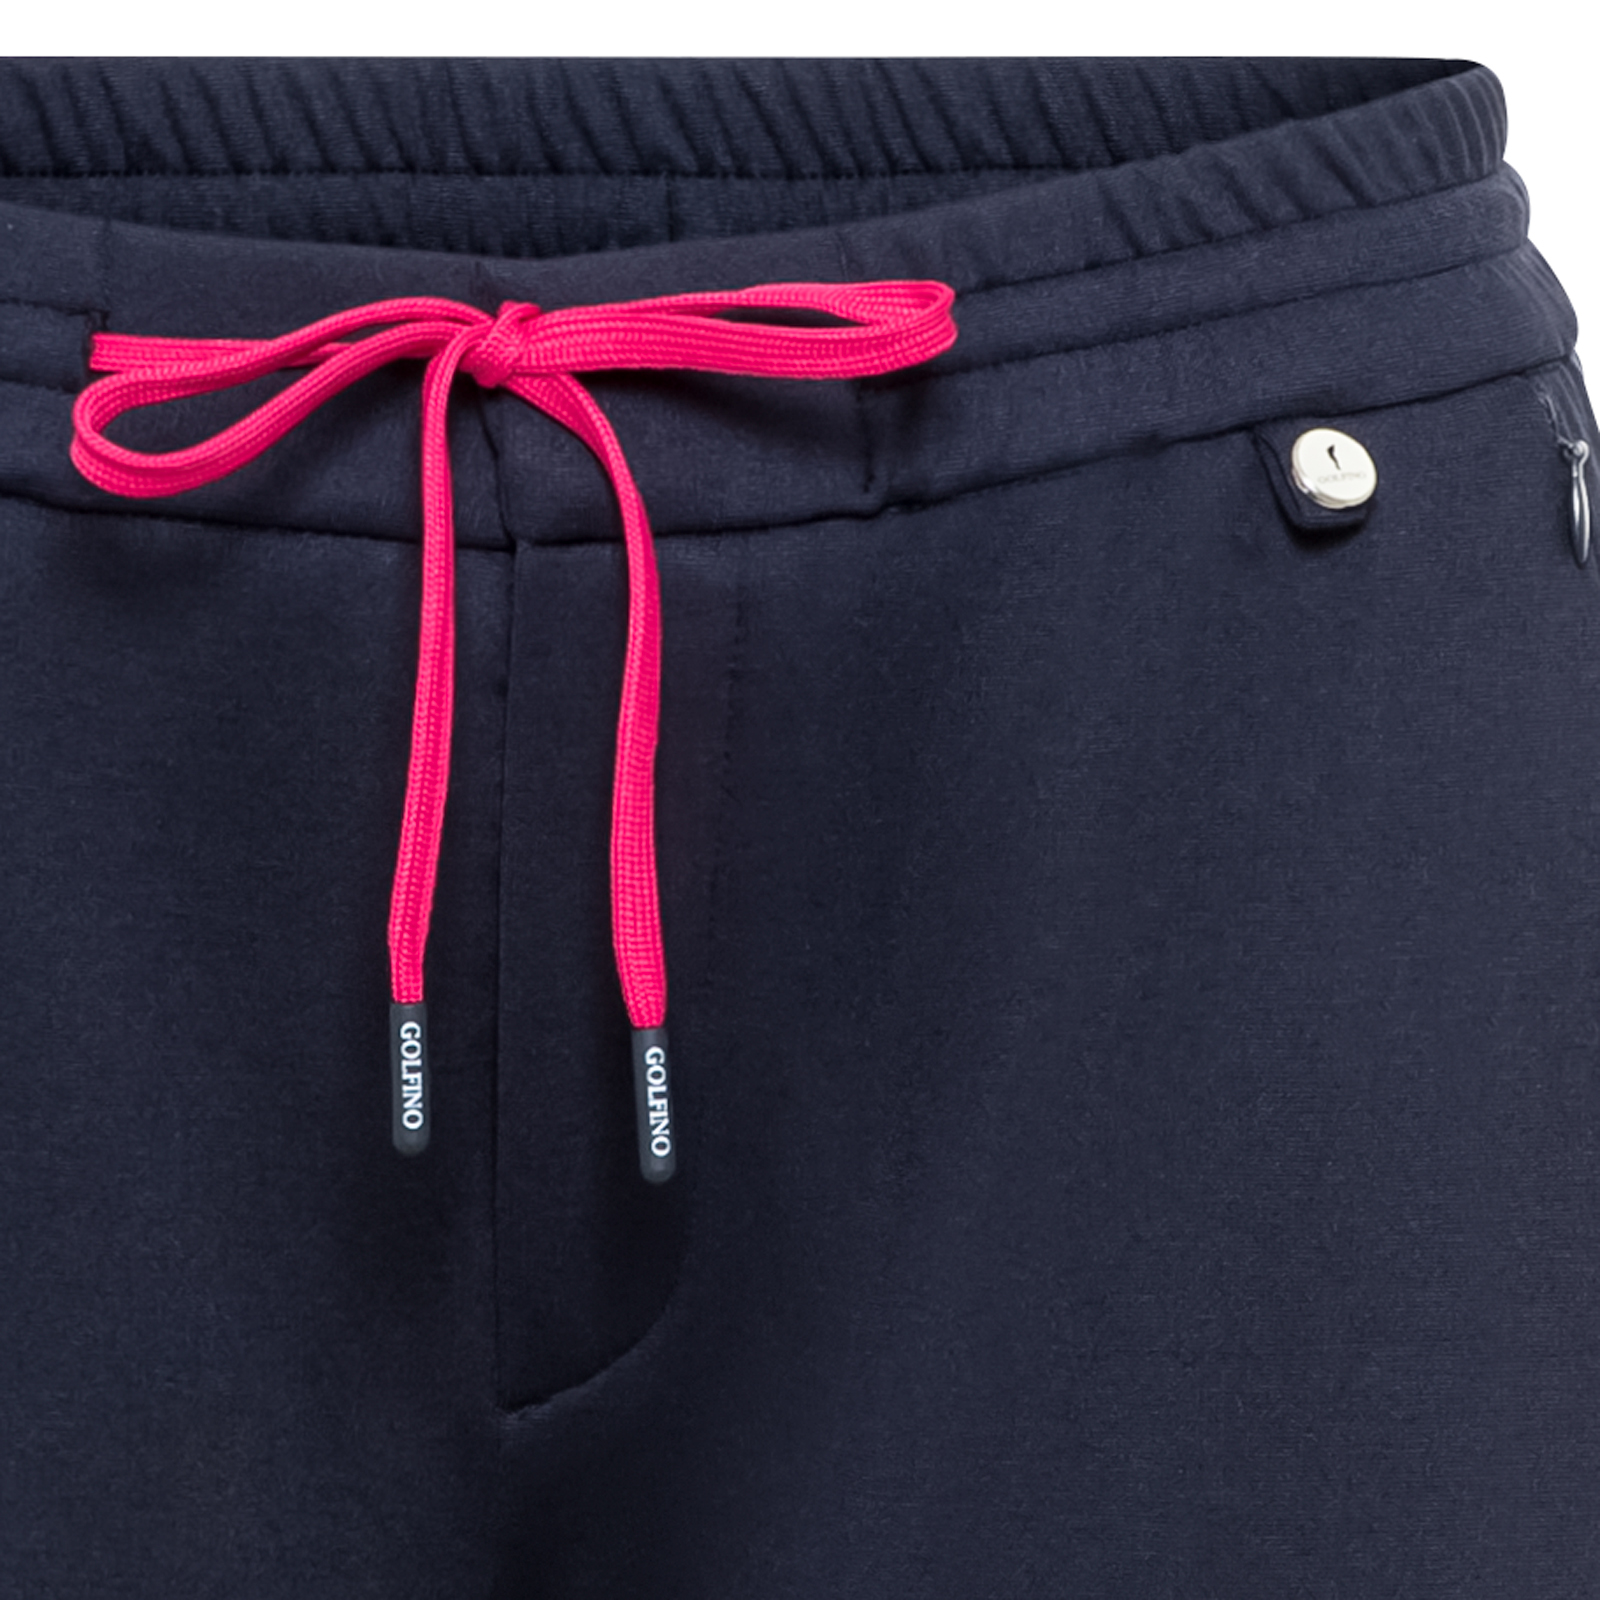 Particularly flexible ladies' 7/8-length trousers in an attractive design